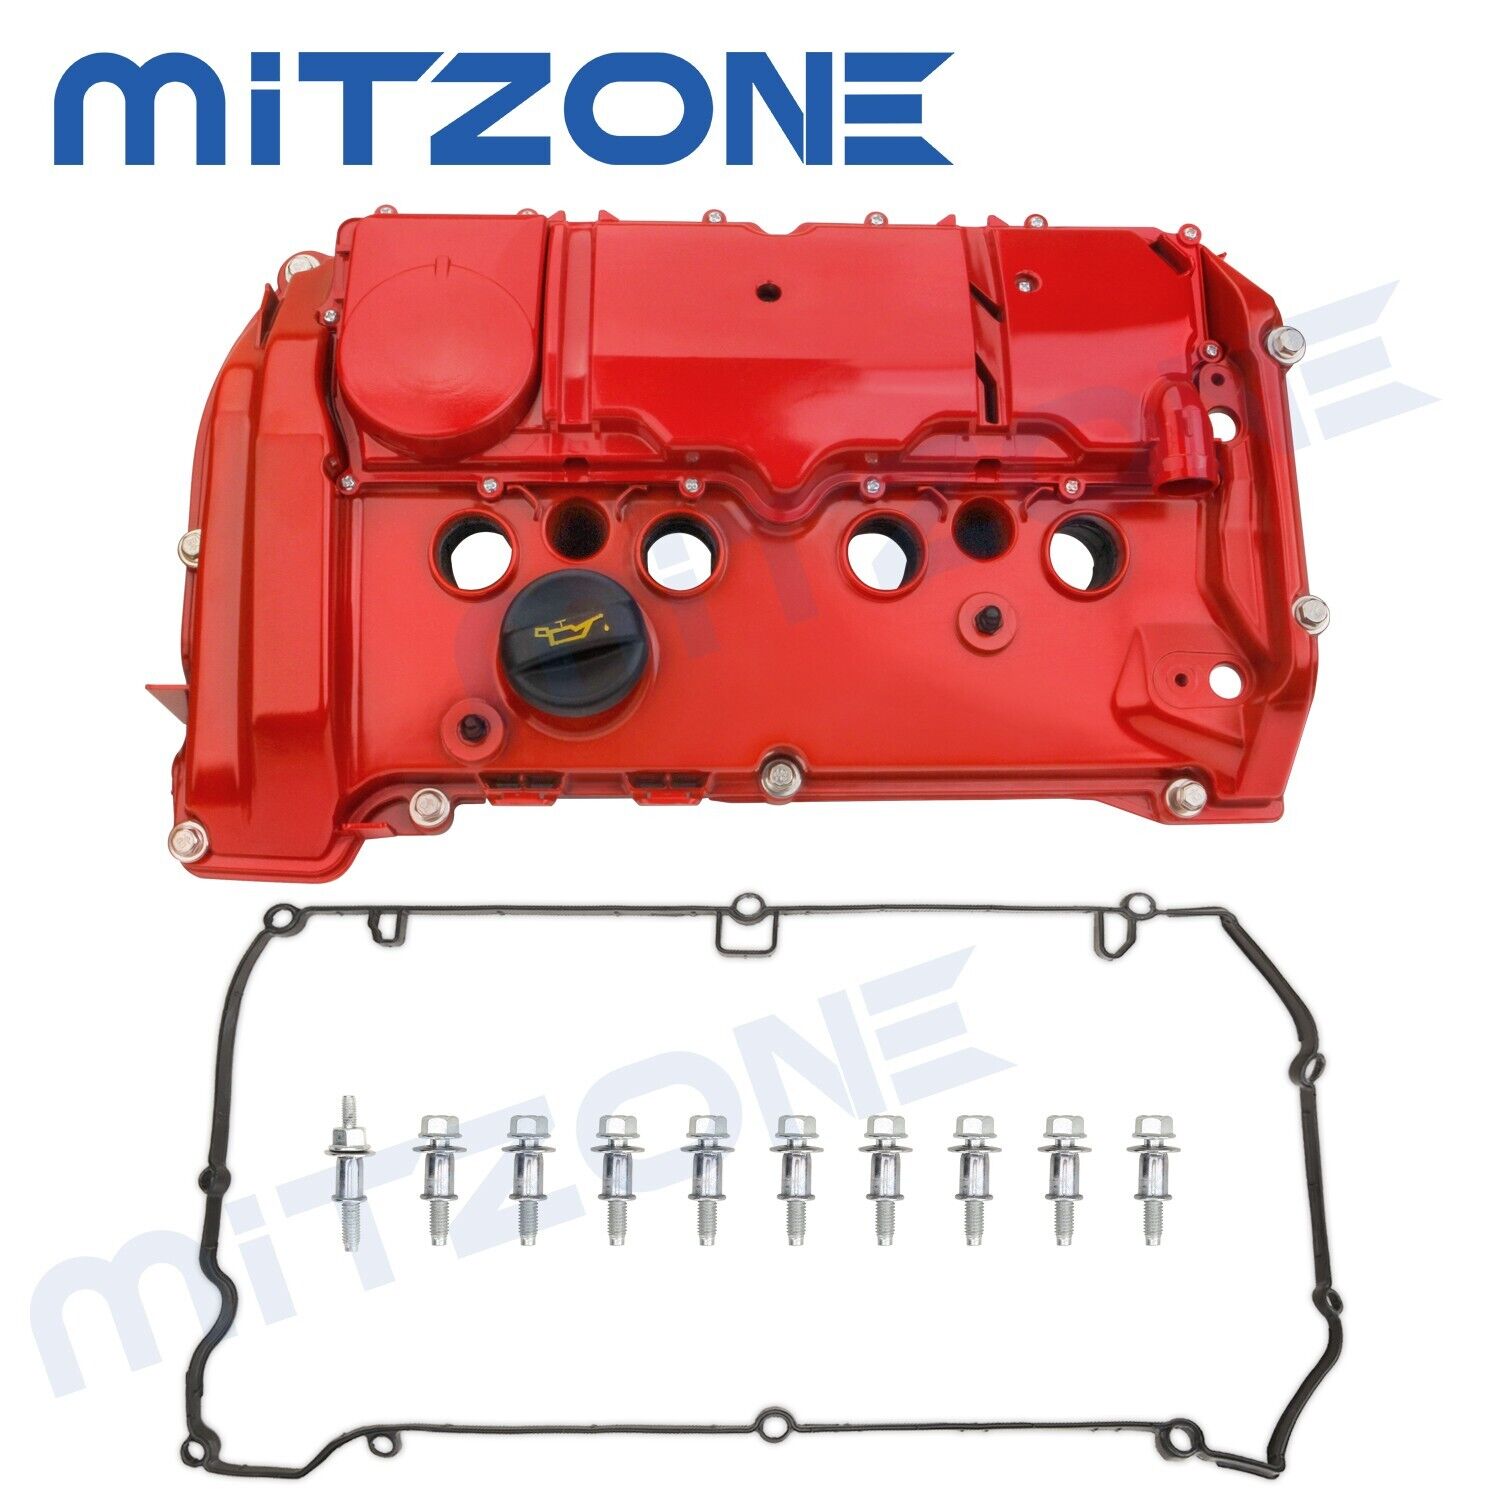 Upgraded Valve Cover for N18 Mini Cooper S Roadster R59 Clubman R55 1.6L Turbo